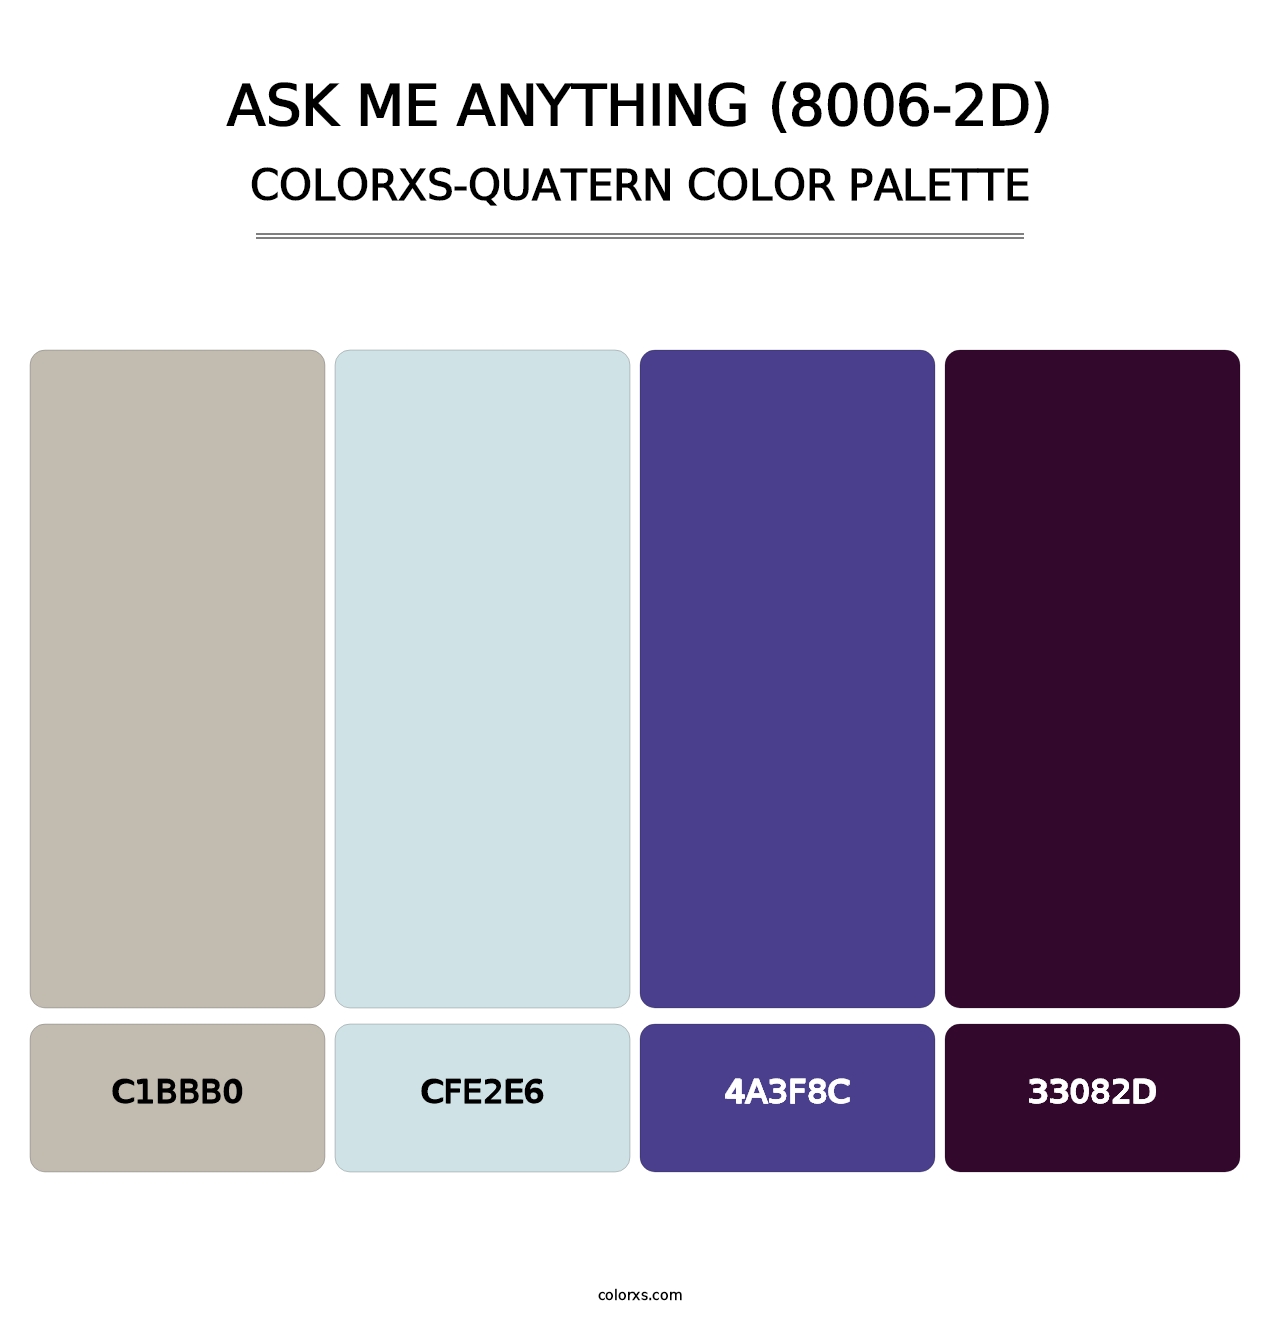 Ask Me Anything (8006-2D) - Colorxs Quatern Palette